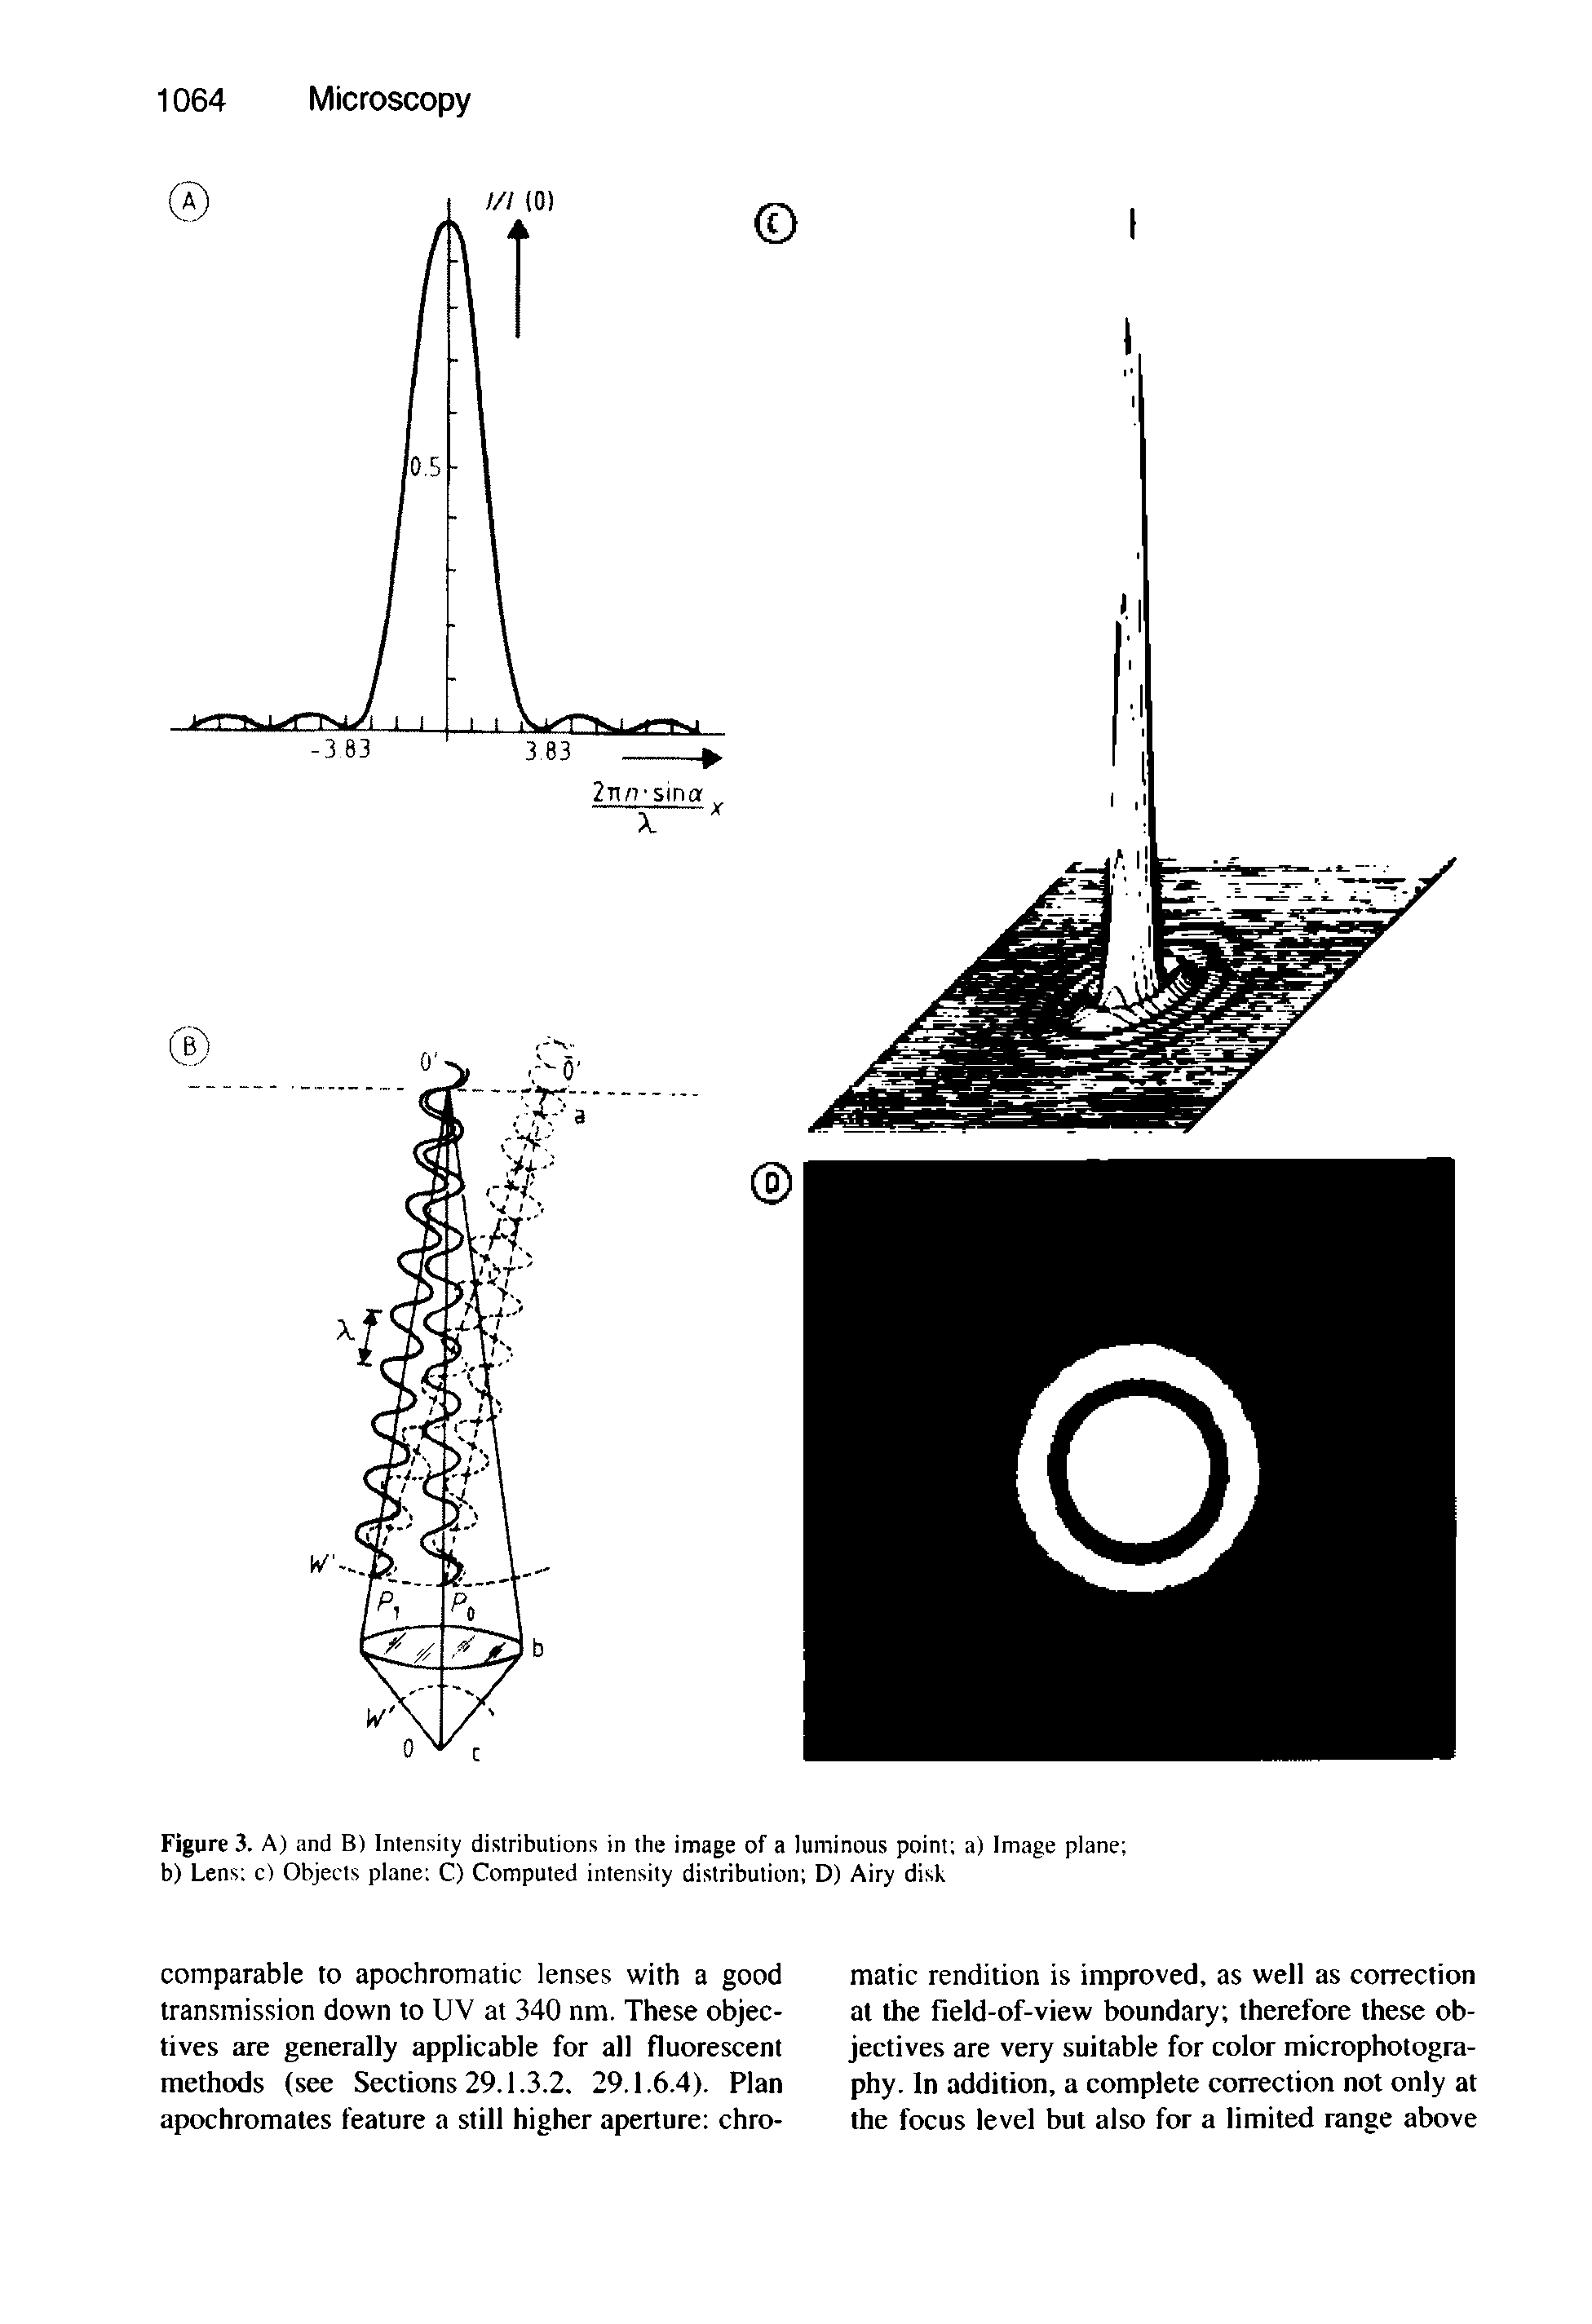 Figure 3. A) and B) Intensity distributions in the image of a luminous point a) Image plane b) Lens c) Objects plane C) Computed intensity distribution D) Airy disk...